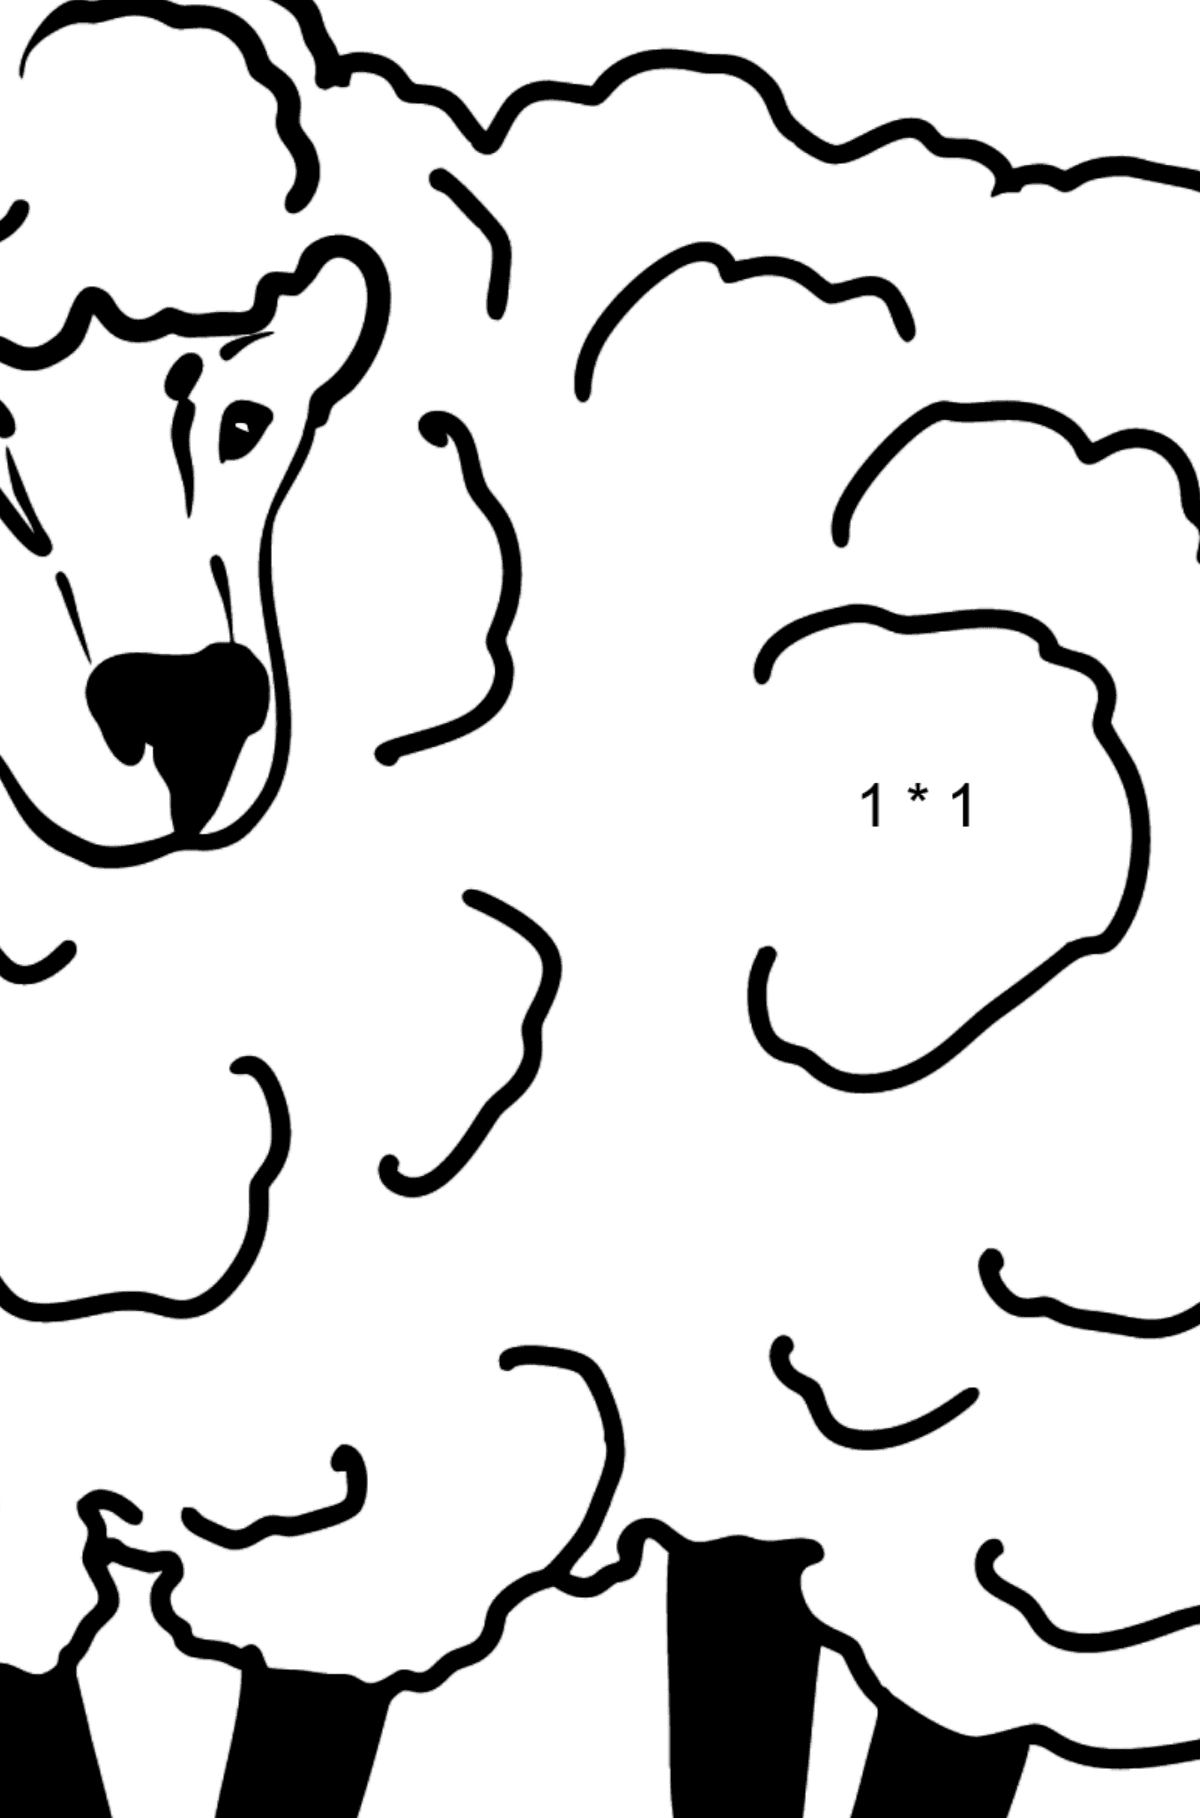 Sheep coloring page - Math Coloring - Multiplication for Kids